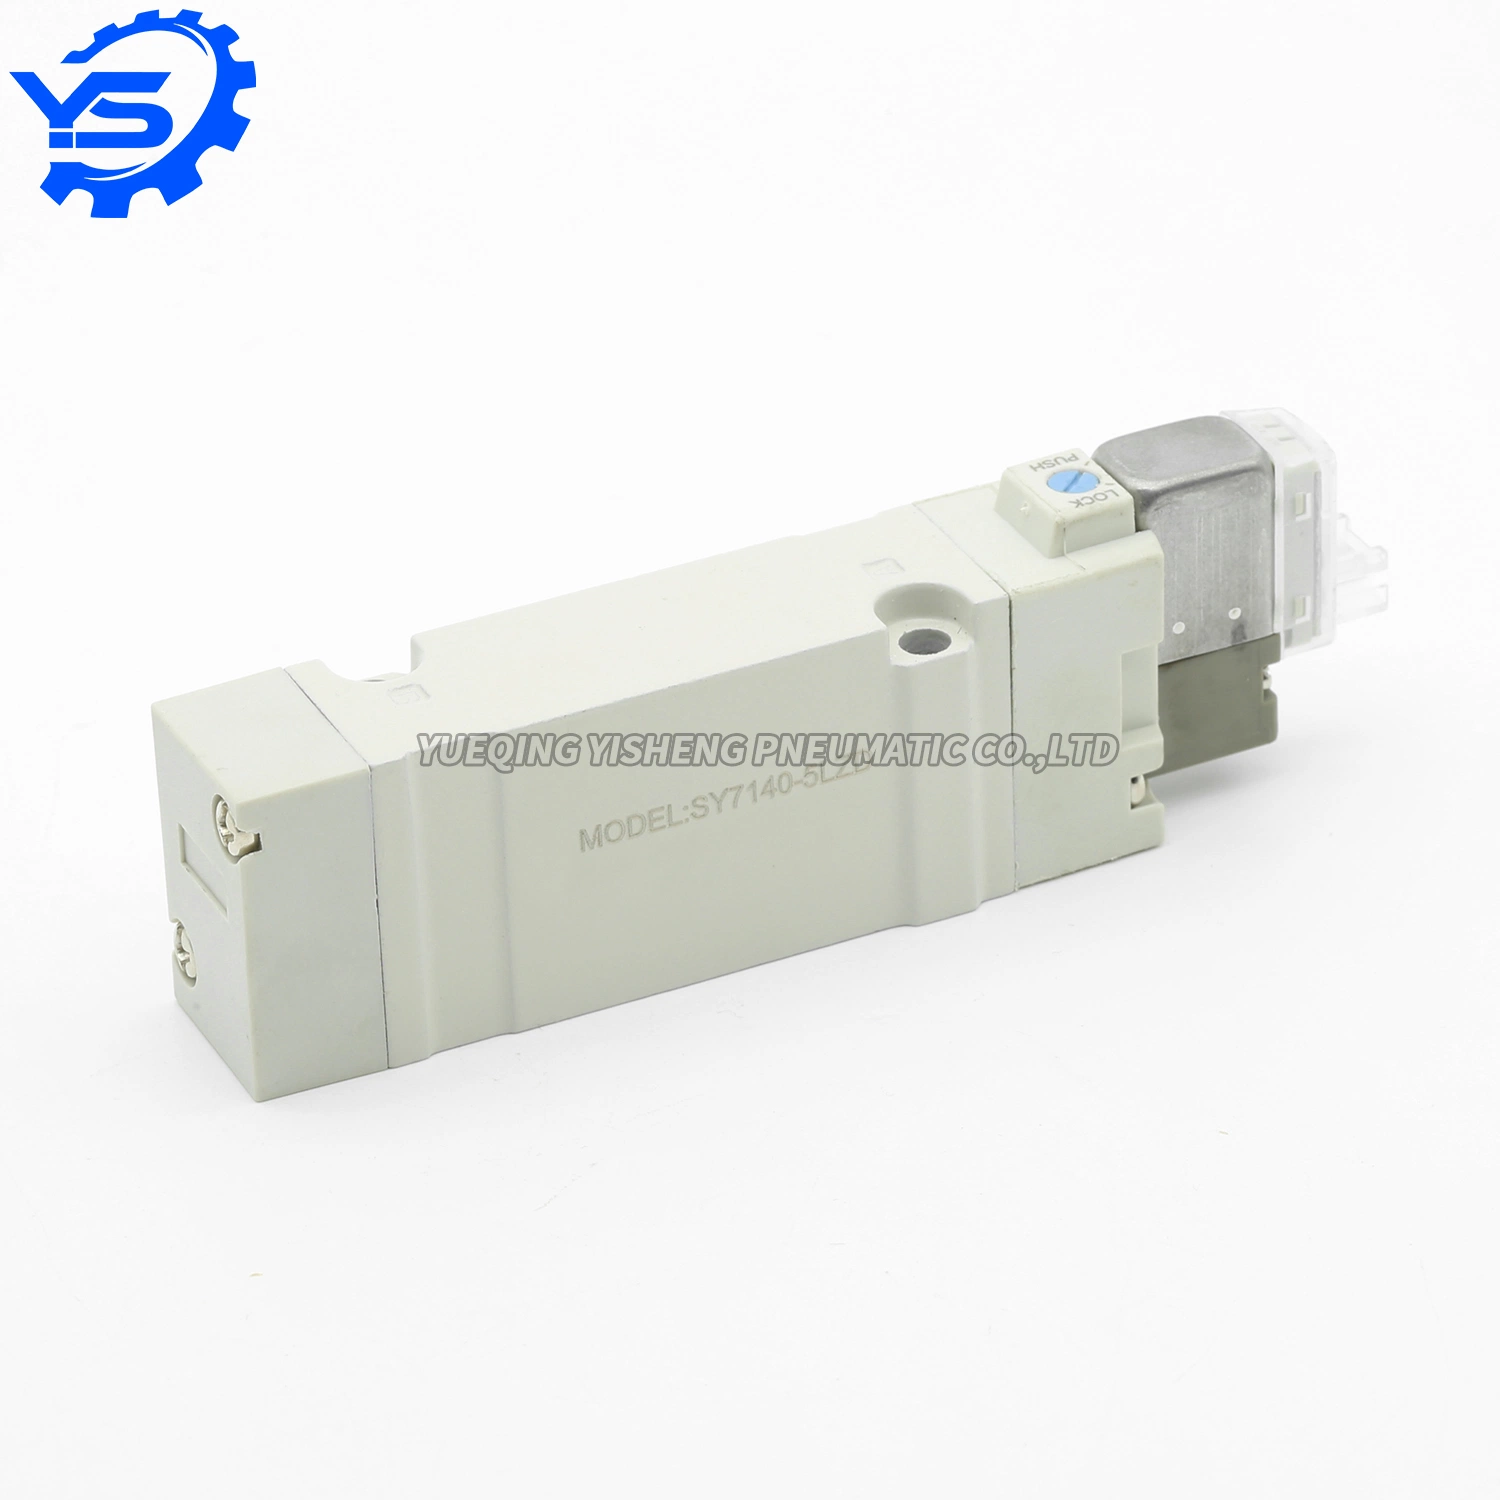 Sy Series Sy7140-5lzd Valves Single Coil Directional Solenoid Valve DC24V Air Control Pneumatic Solenoid Valve